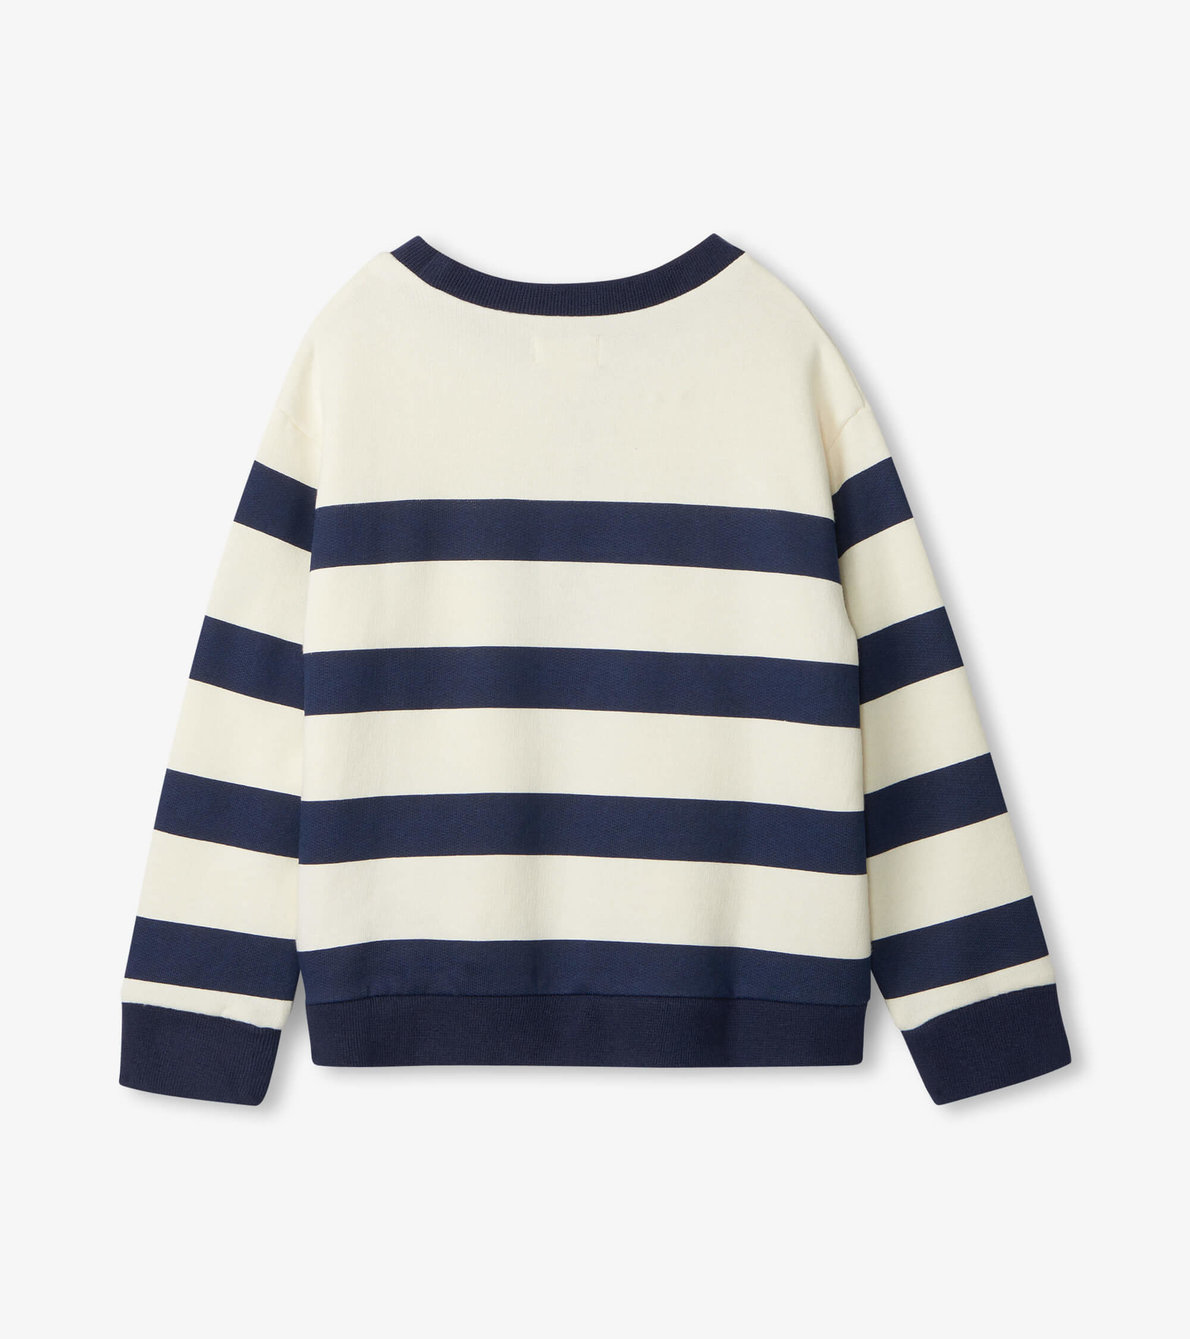 View larger image of Nautical Stripes Pullover Sweatshirt